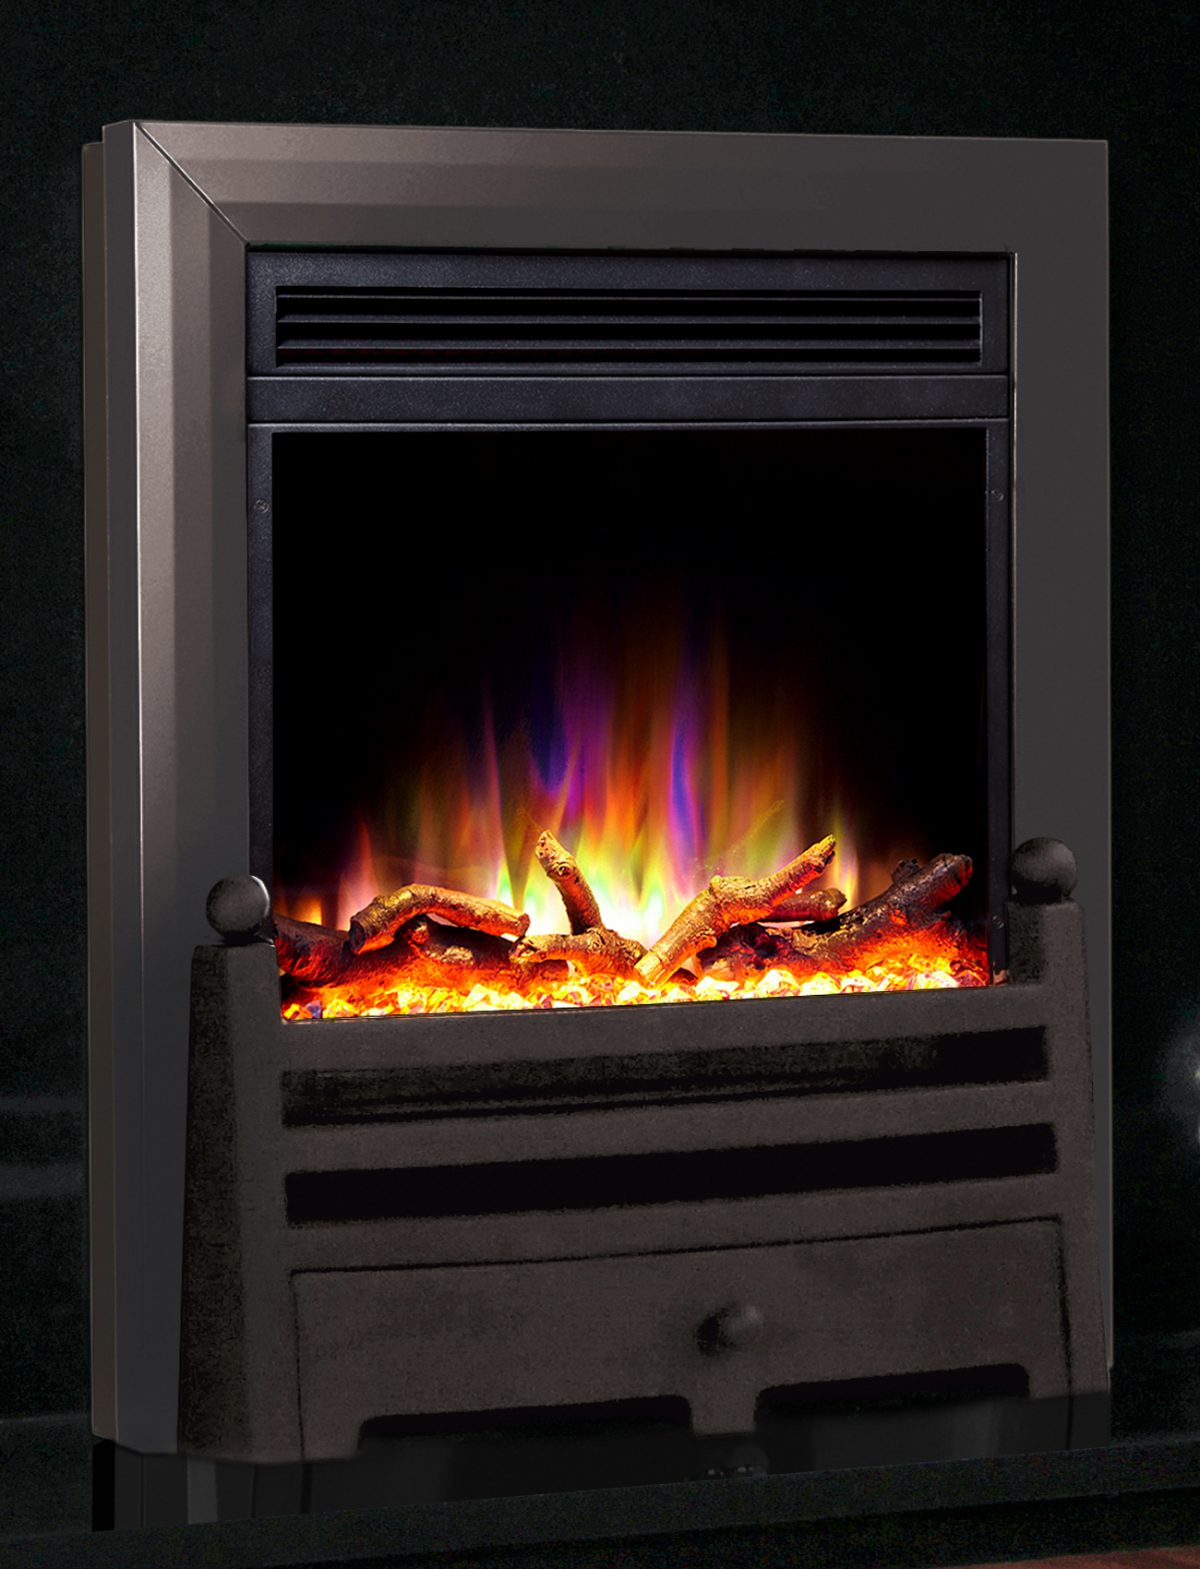 Celsi Electriflame XD Hearth Mounted Bauhaus Electric Fire in Black